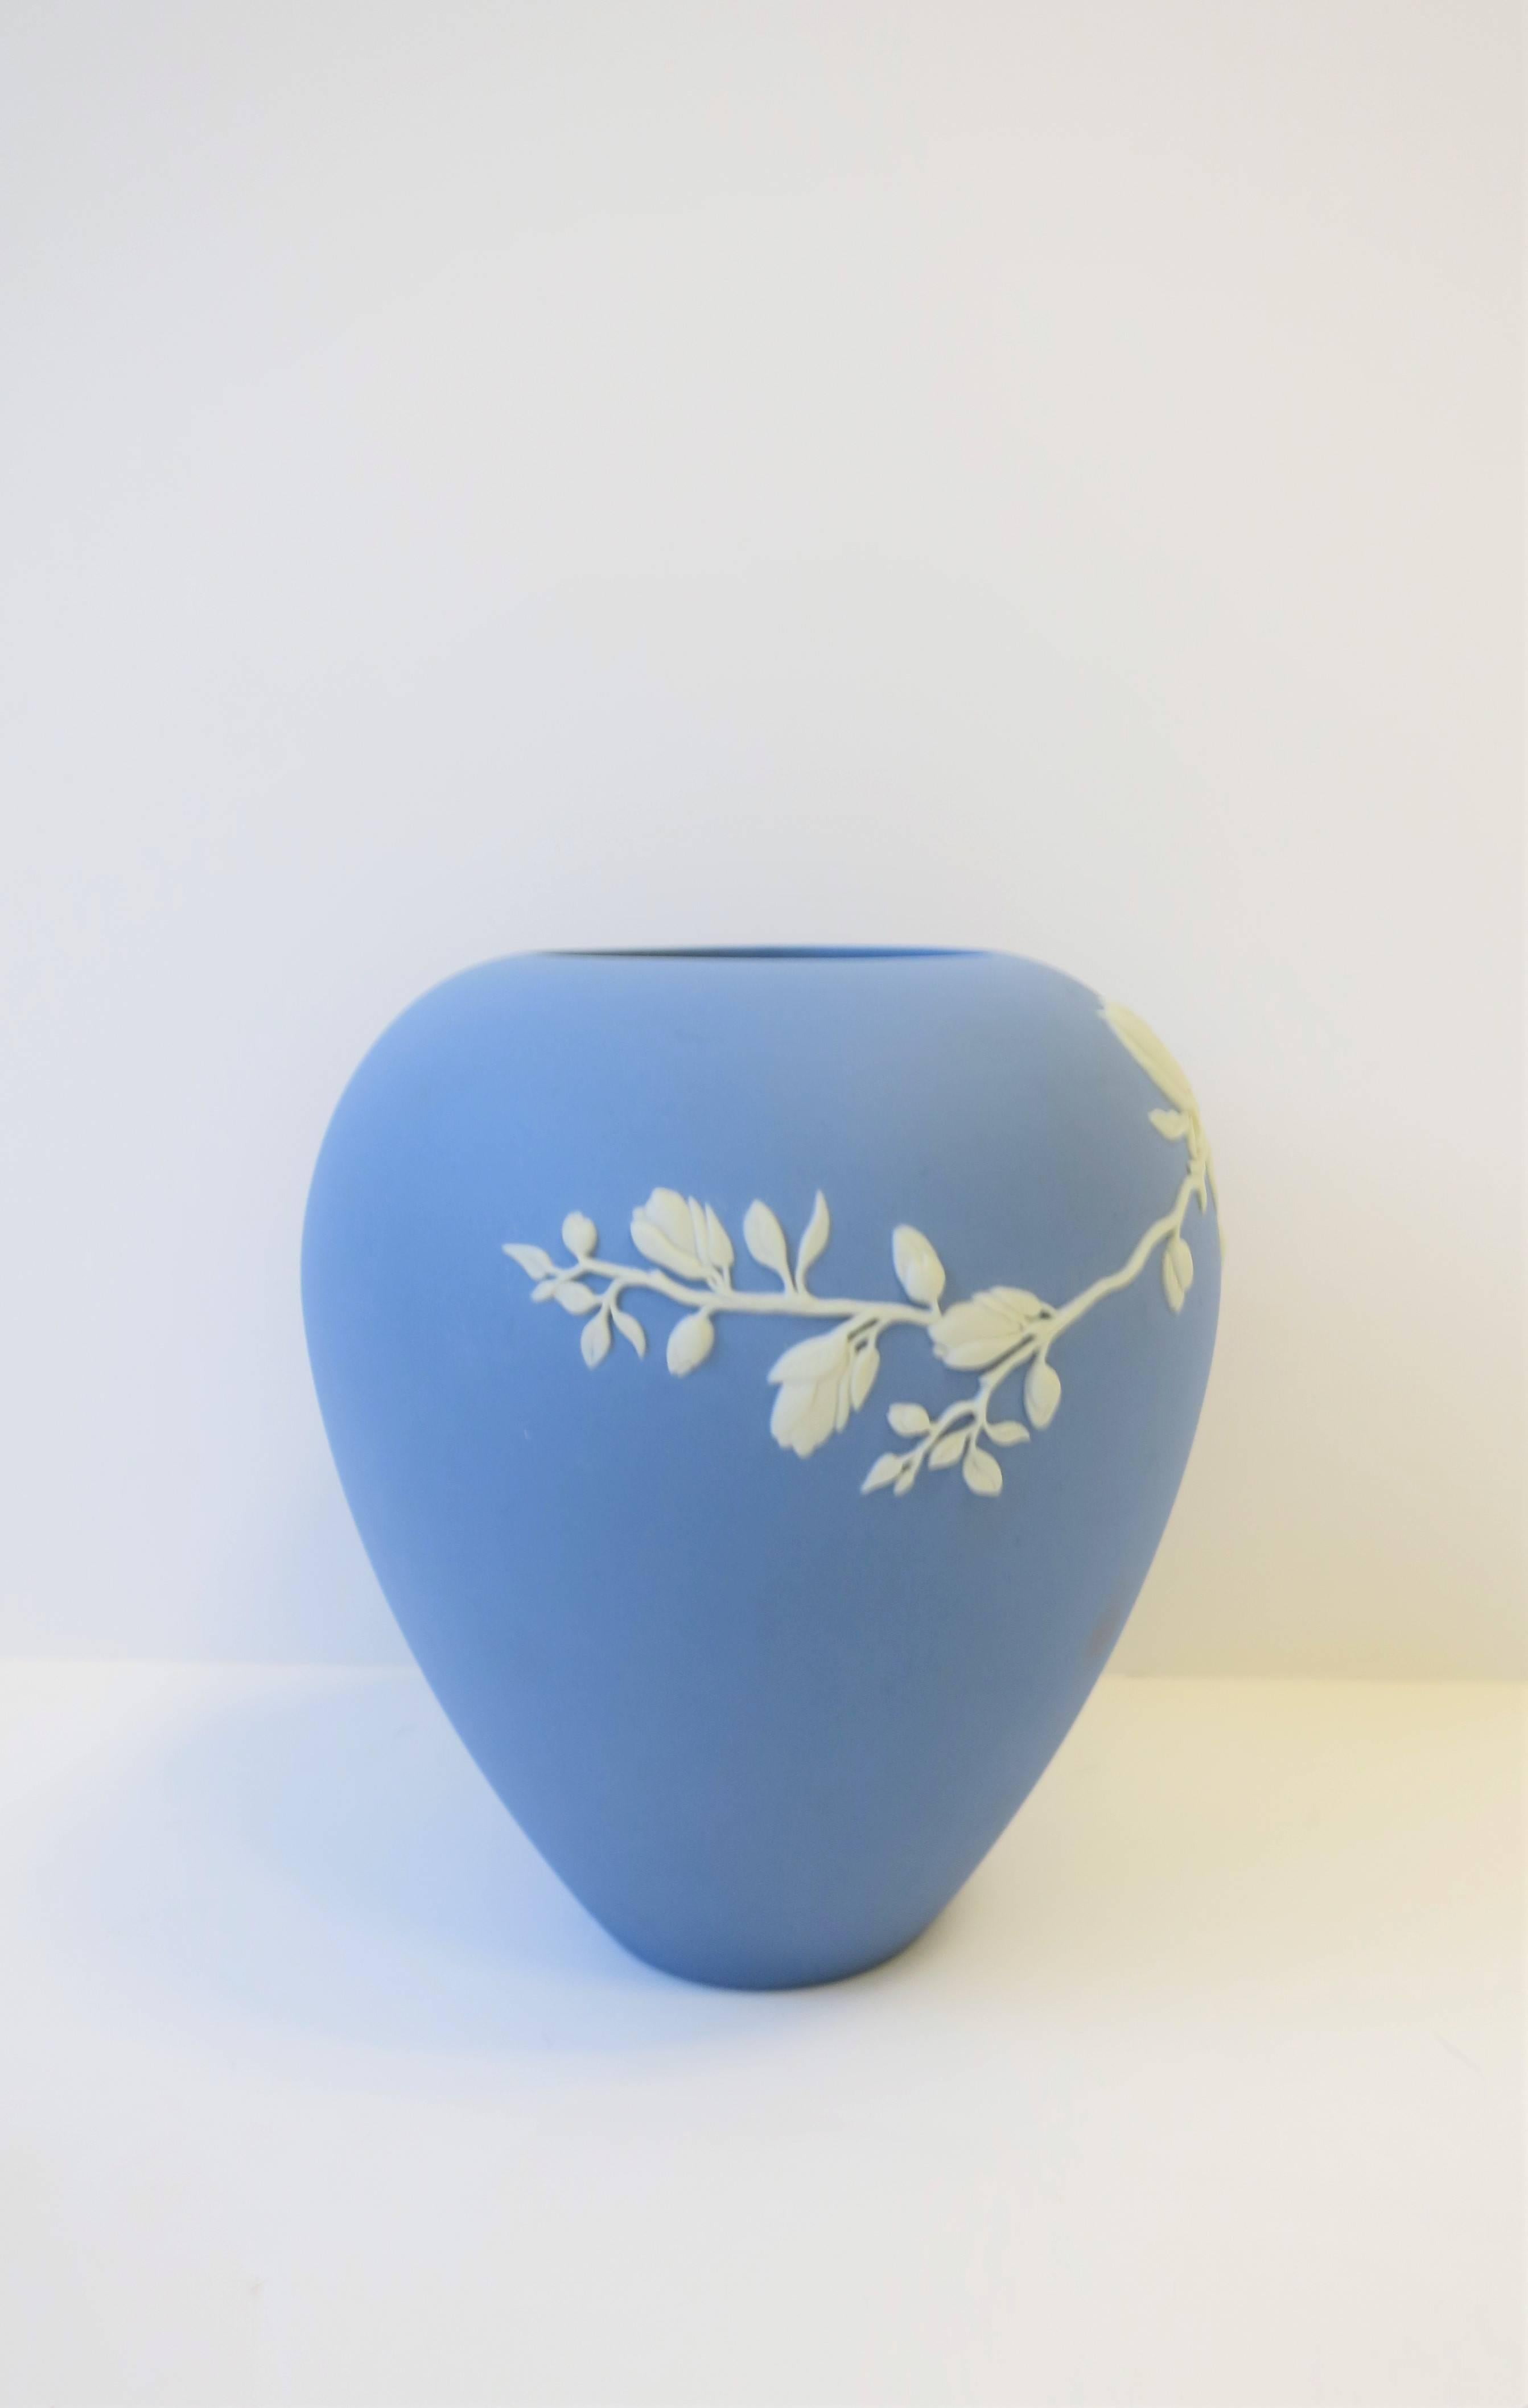 Contemporary Blue and White Vase by Wedgwood, 21st Century